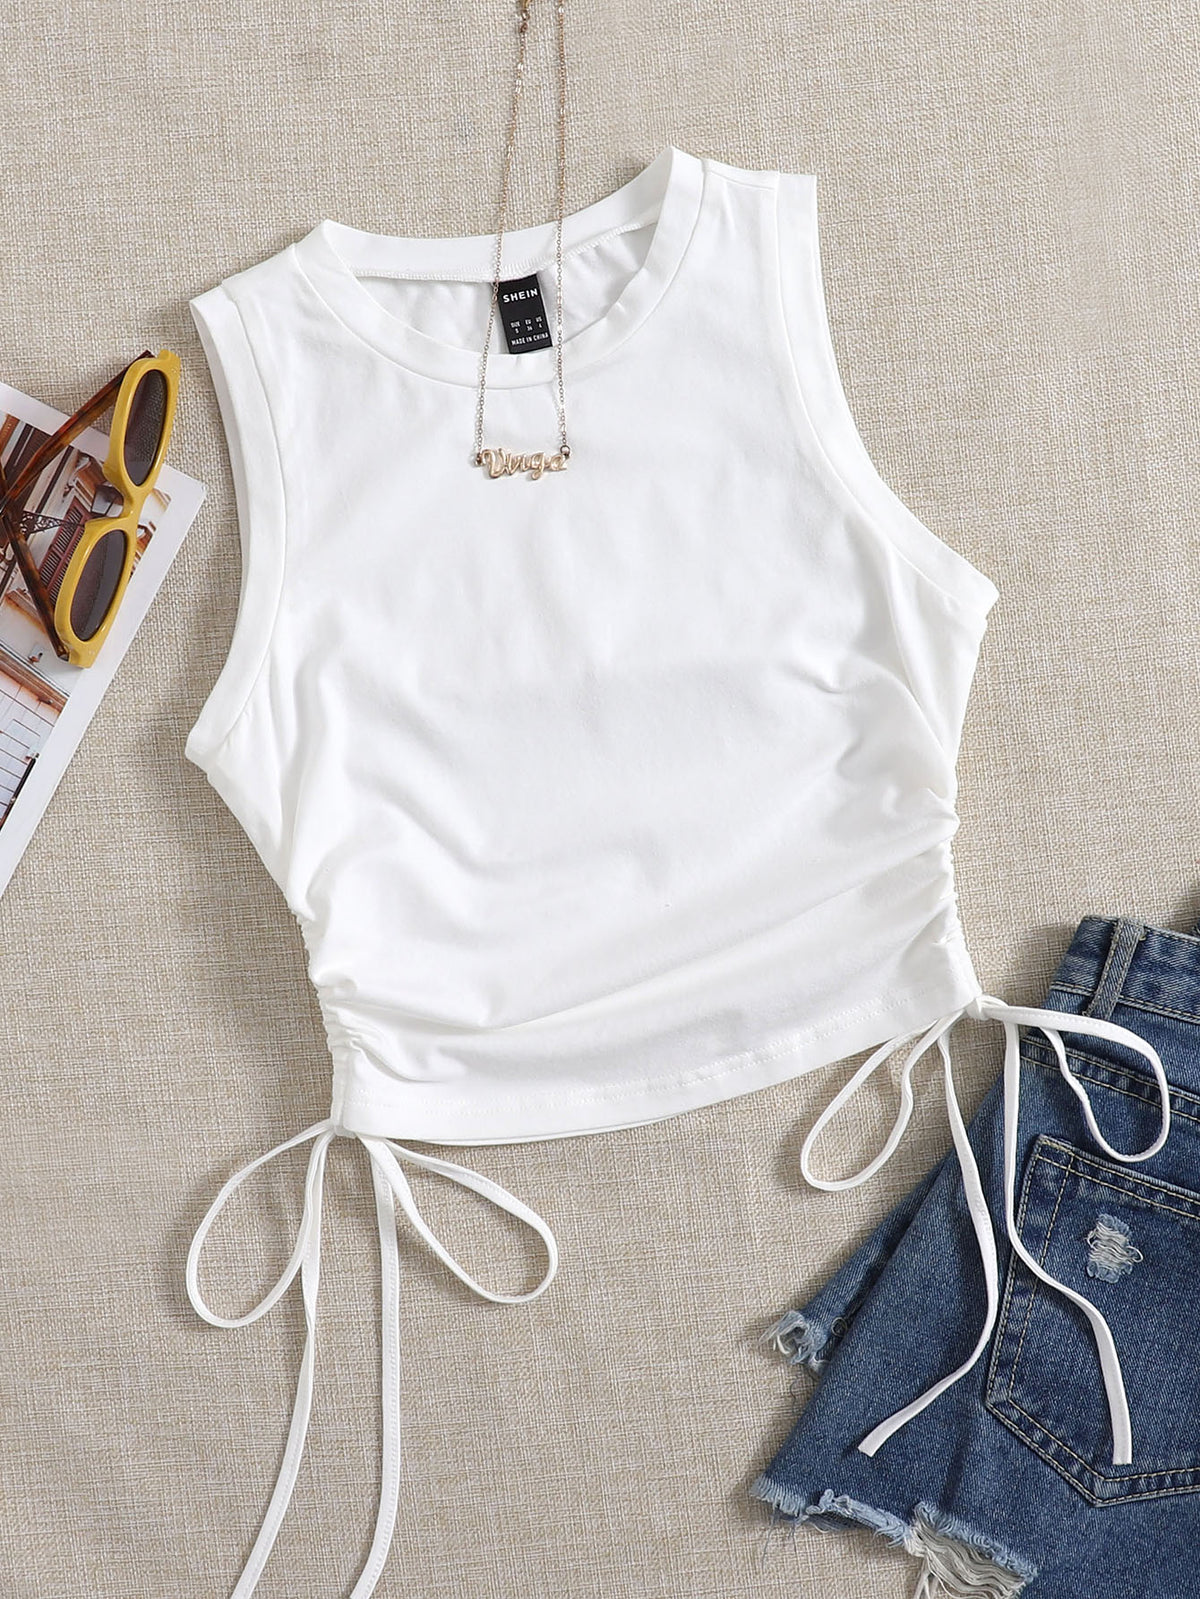 Crop Tank Top with Drawstring Side - White / XL